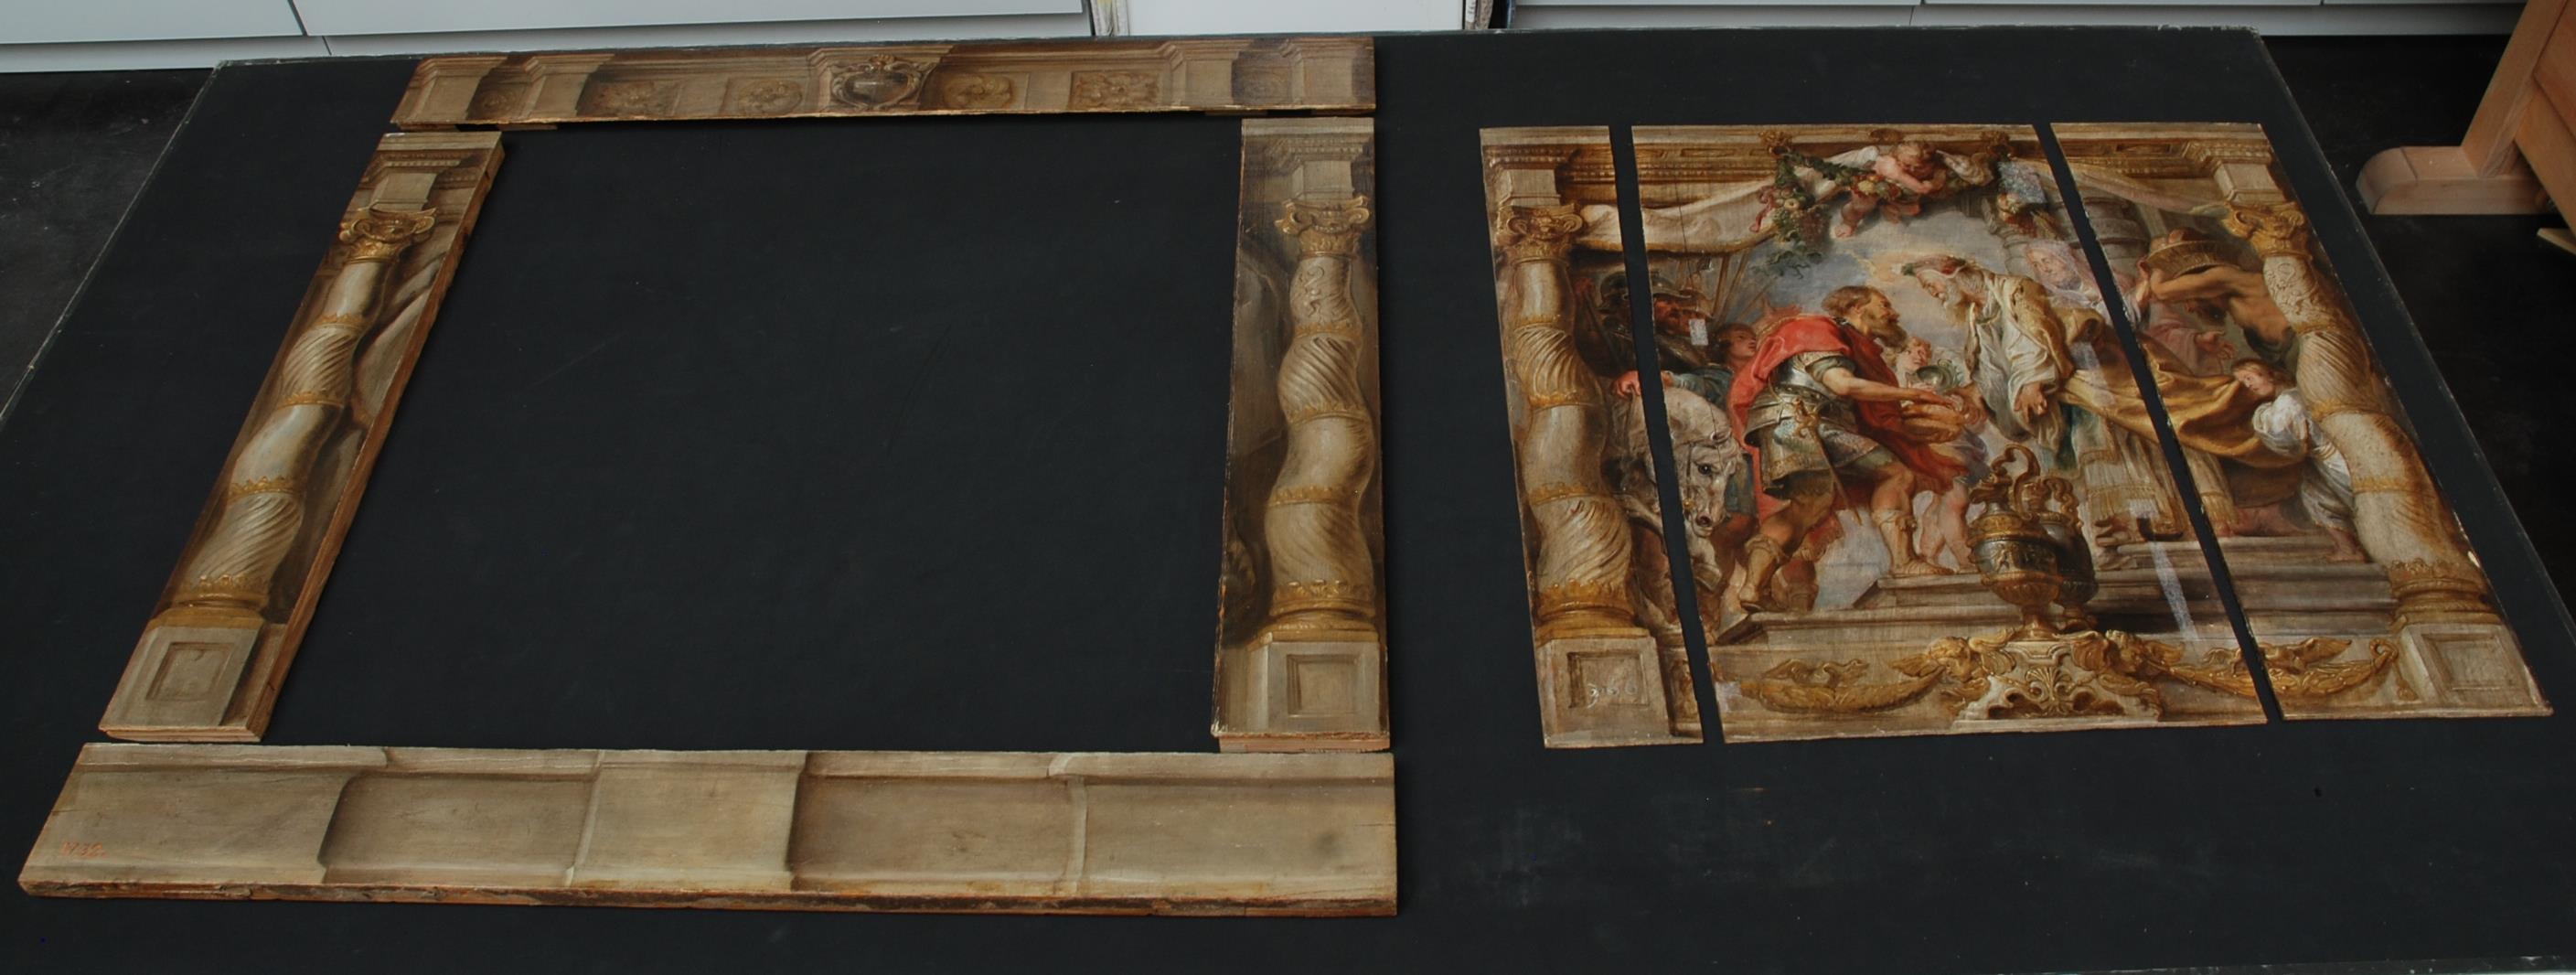 The restoration of the pictorial surfaces